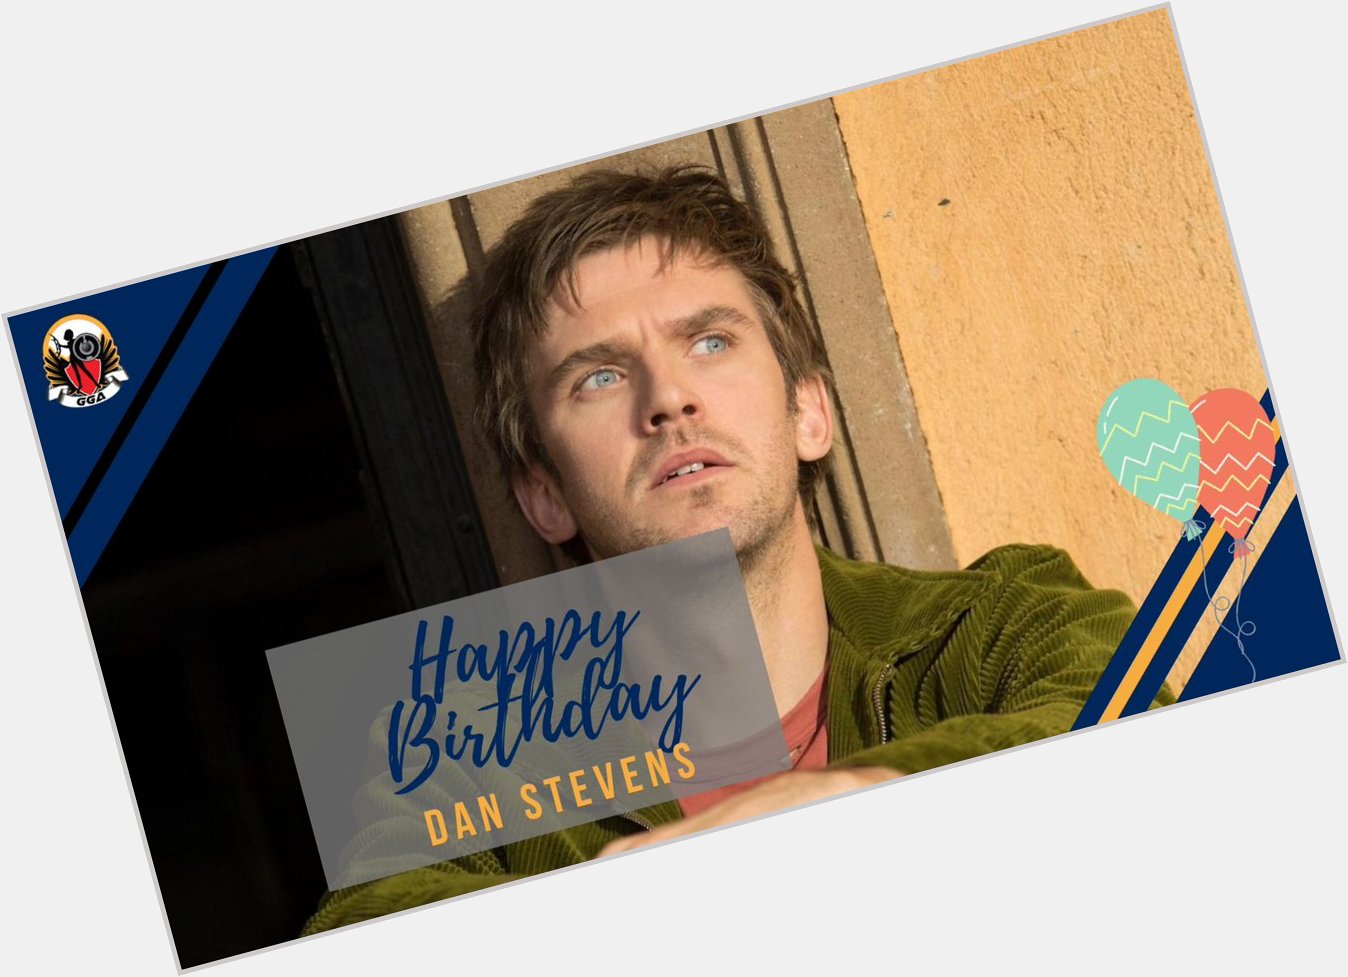 Happy birthday, Dan Stevens!  What\s your favorite role of his?  